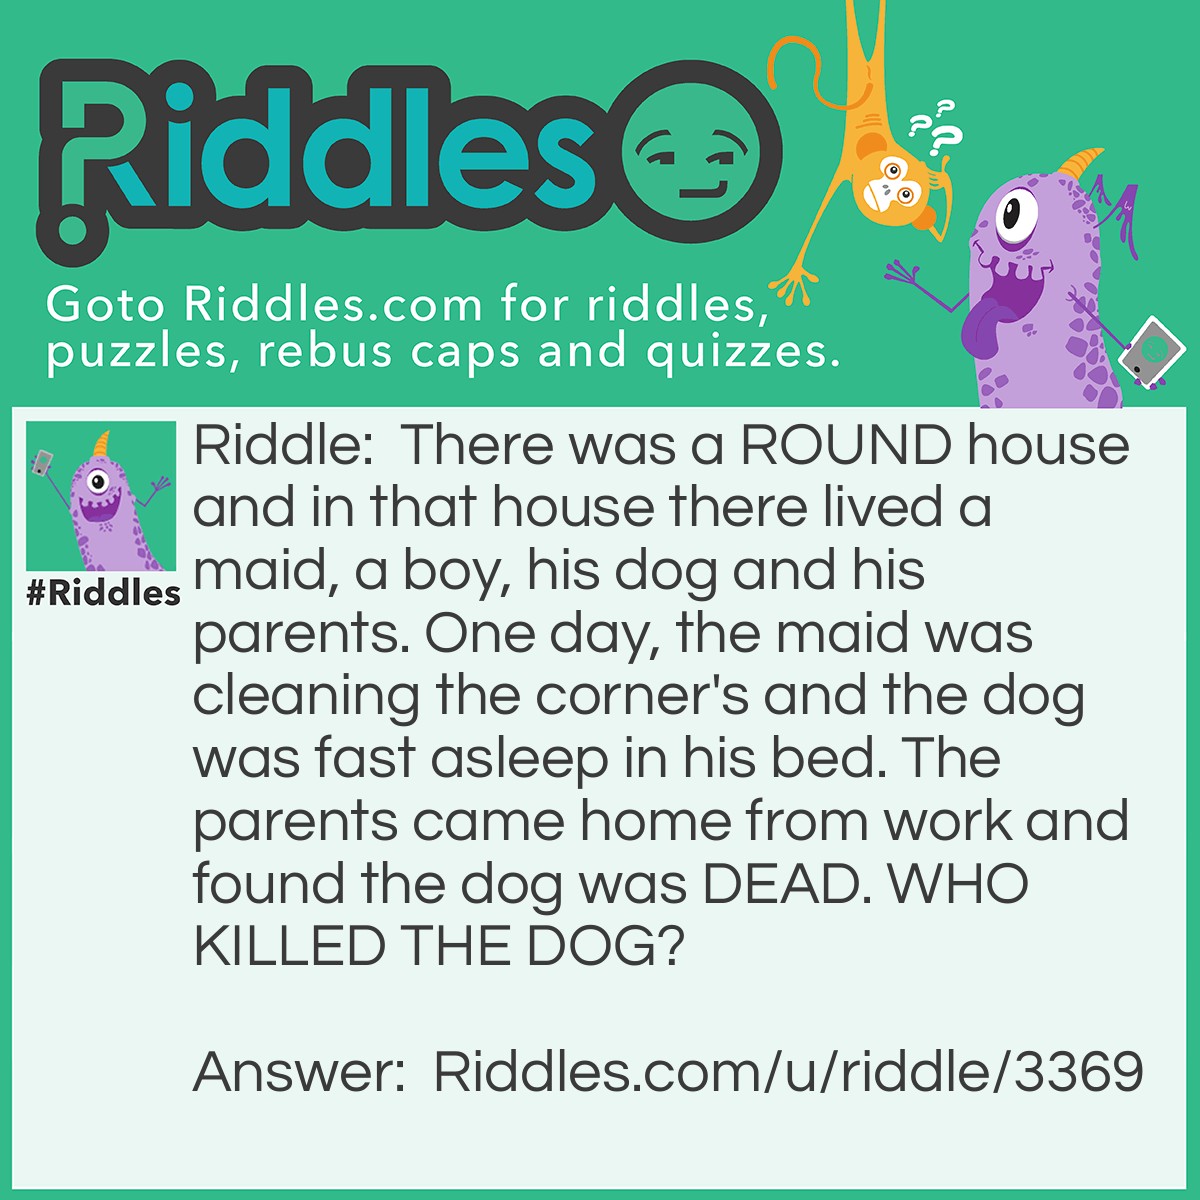 Riddle: There was a ROUND house and in that house there lived a maid, a boy, his dog and his parents. One day, the maid was cleaning the corner's and the dog was fast asleep in his bed. The parents came home from work and found the dog was DEAD. WHO KILLED THE DOG? Answer: The maid did there are no corner's.